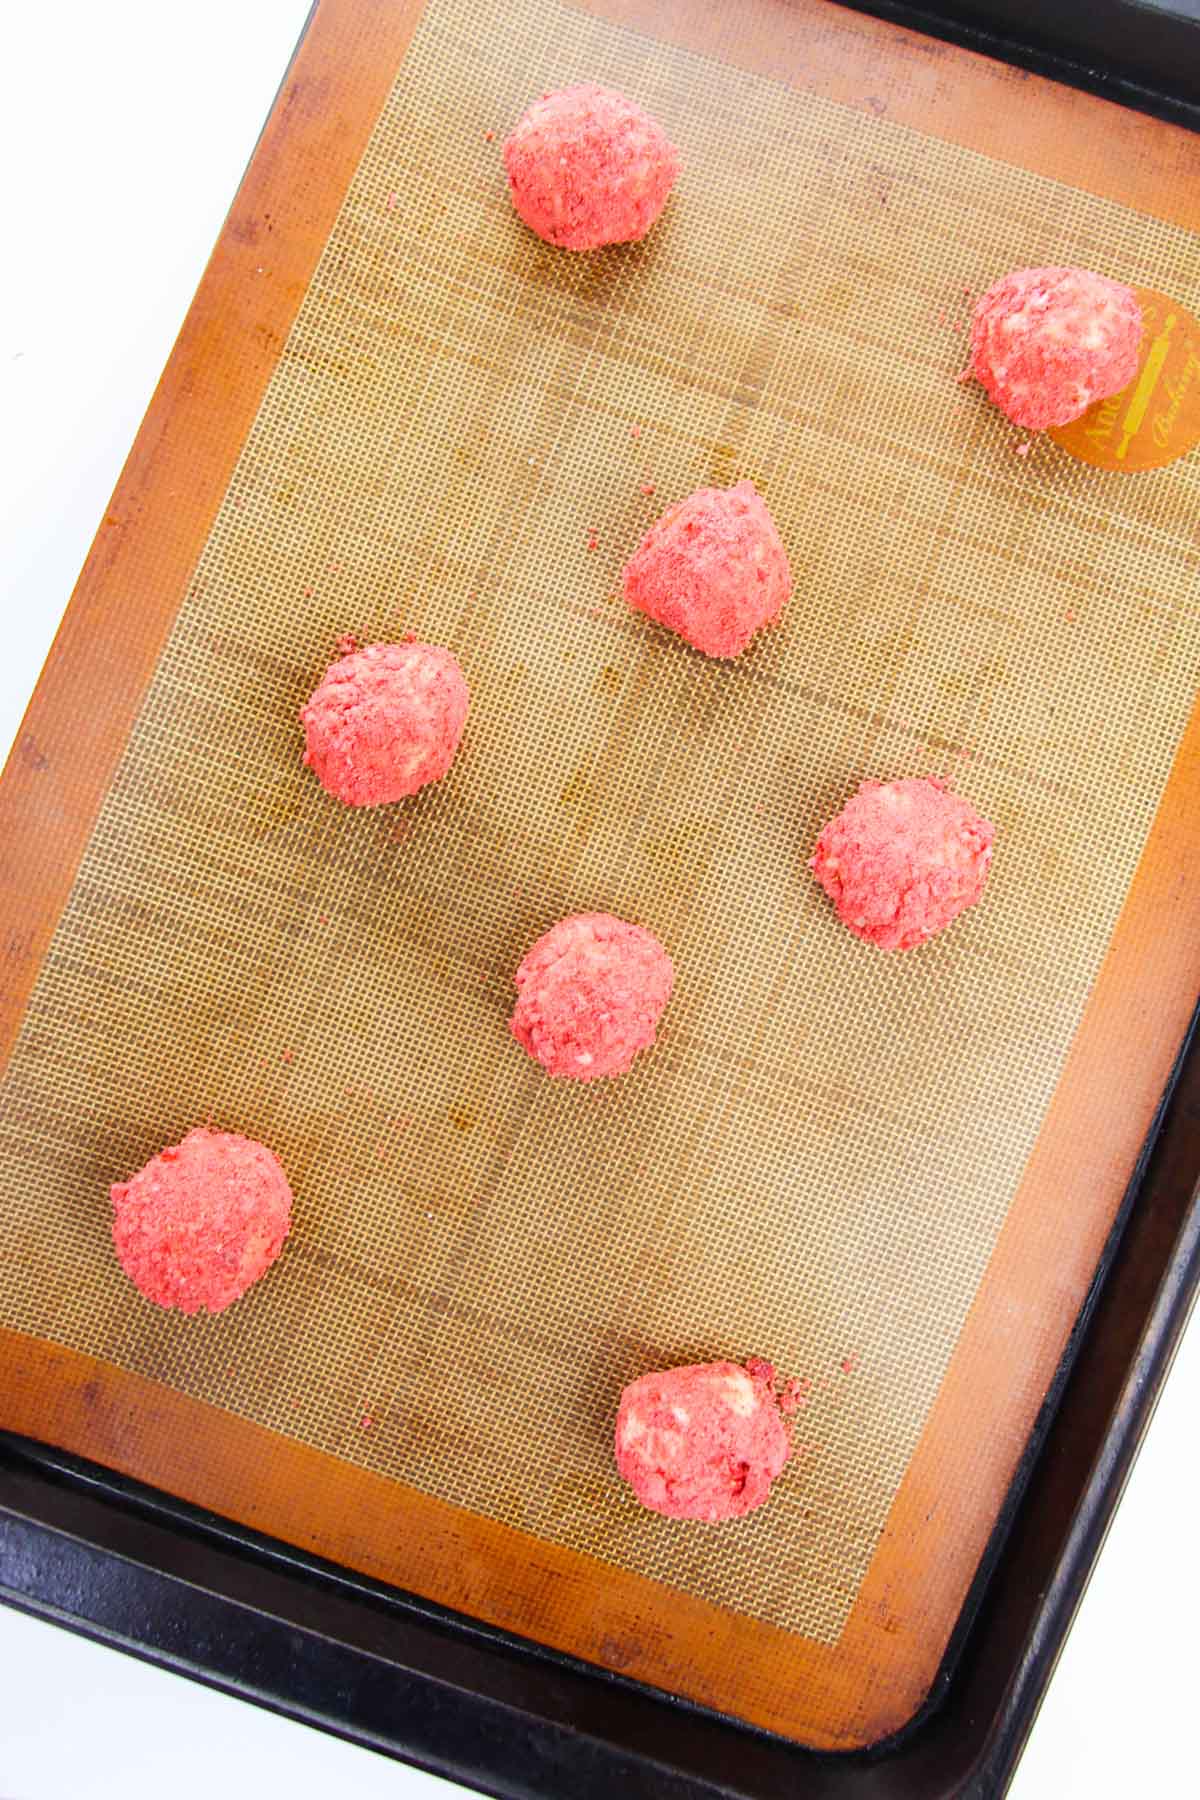 Cookie dough balls on a baking sheet lined with a silicone mat.